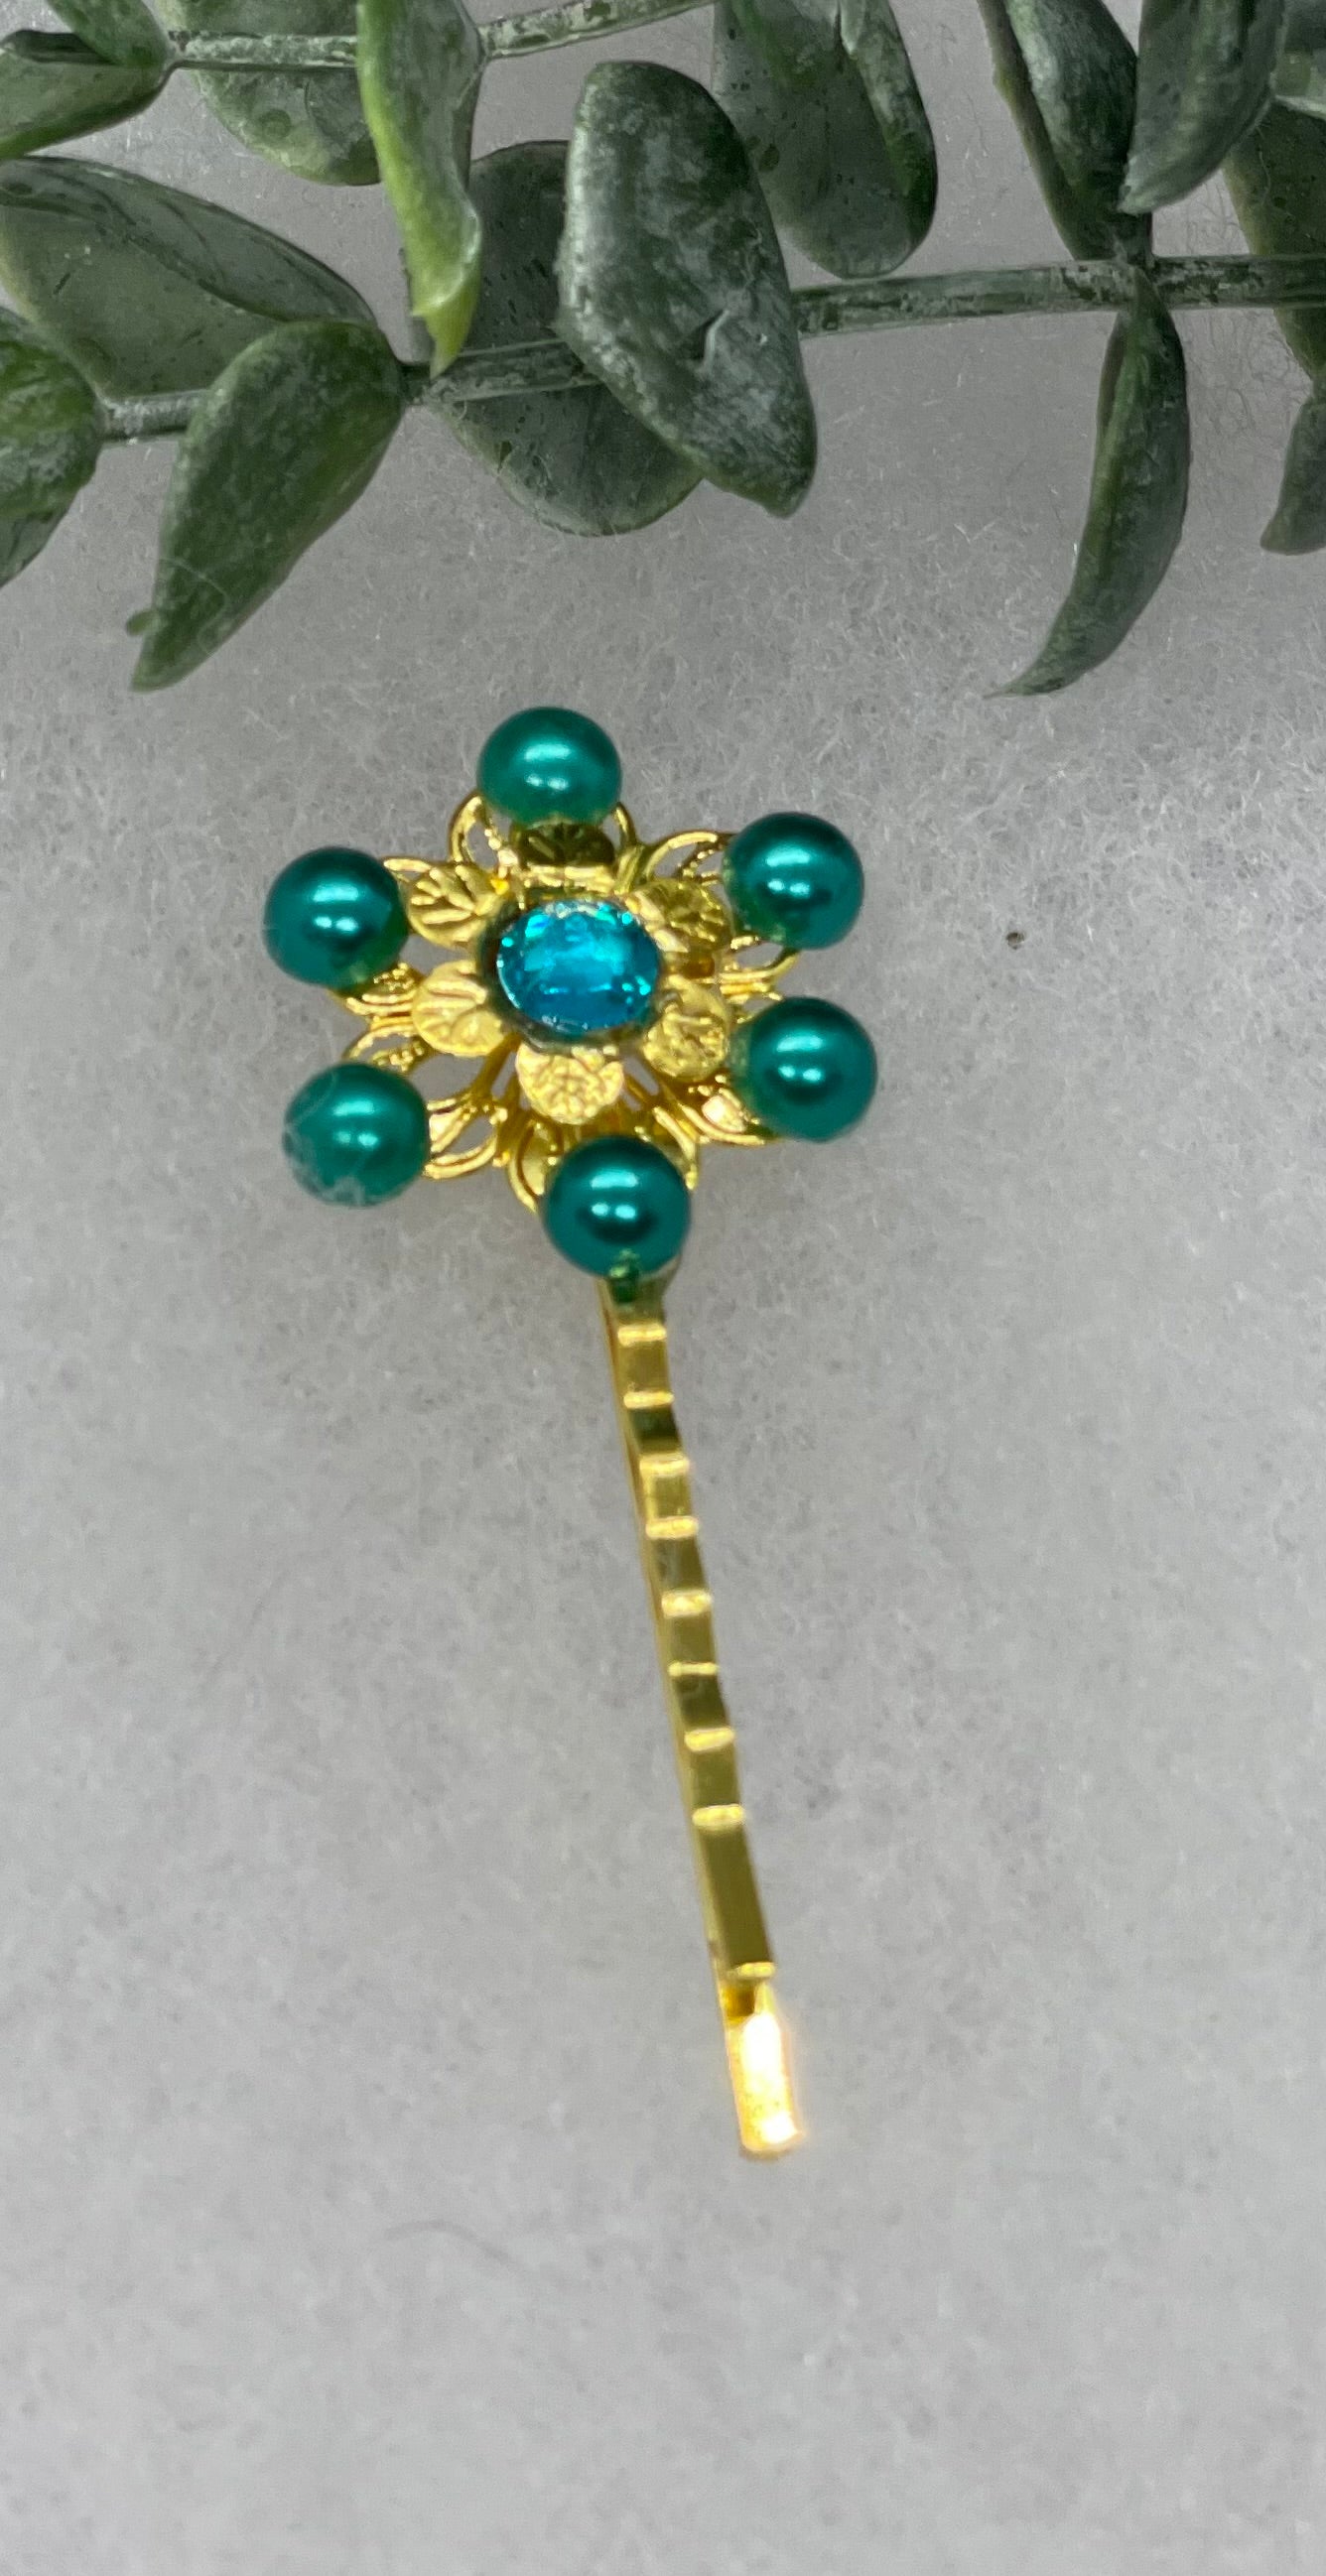 Teal Pearl crystal Gold Antique vintage Style approximately 3.0” flower hair pin wedding engagement bride princess formal hair accessory accessories